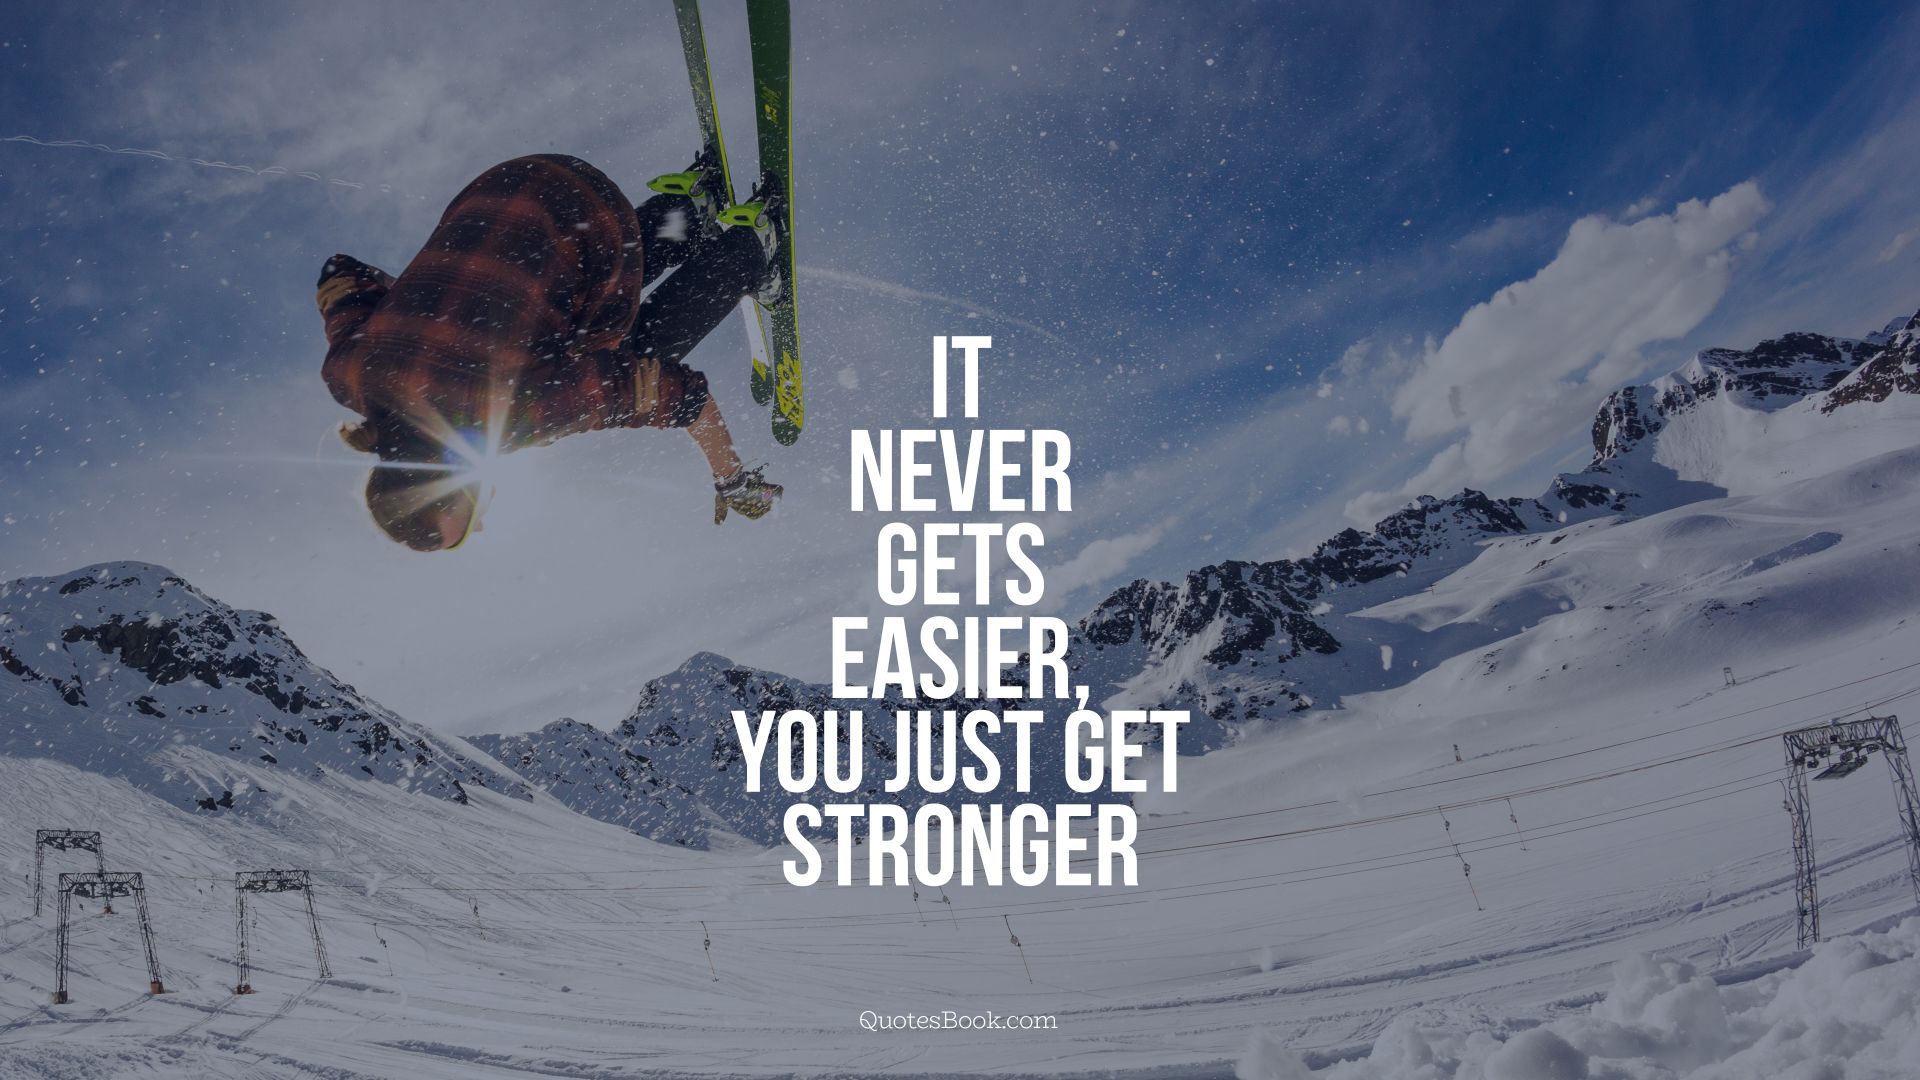 It never gets easier, you just get 
stronger